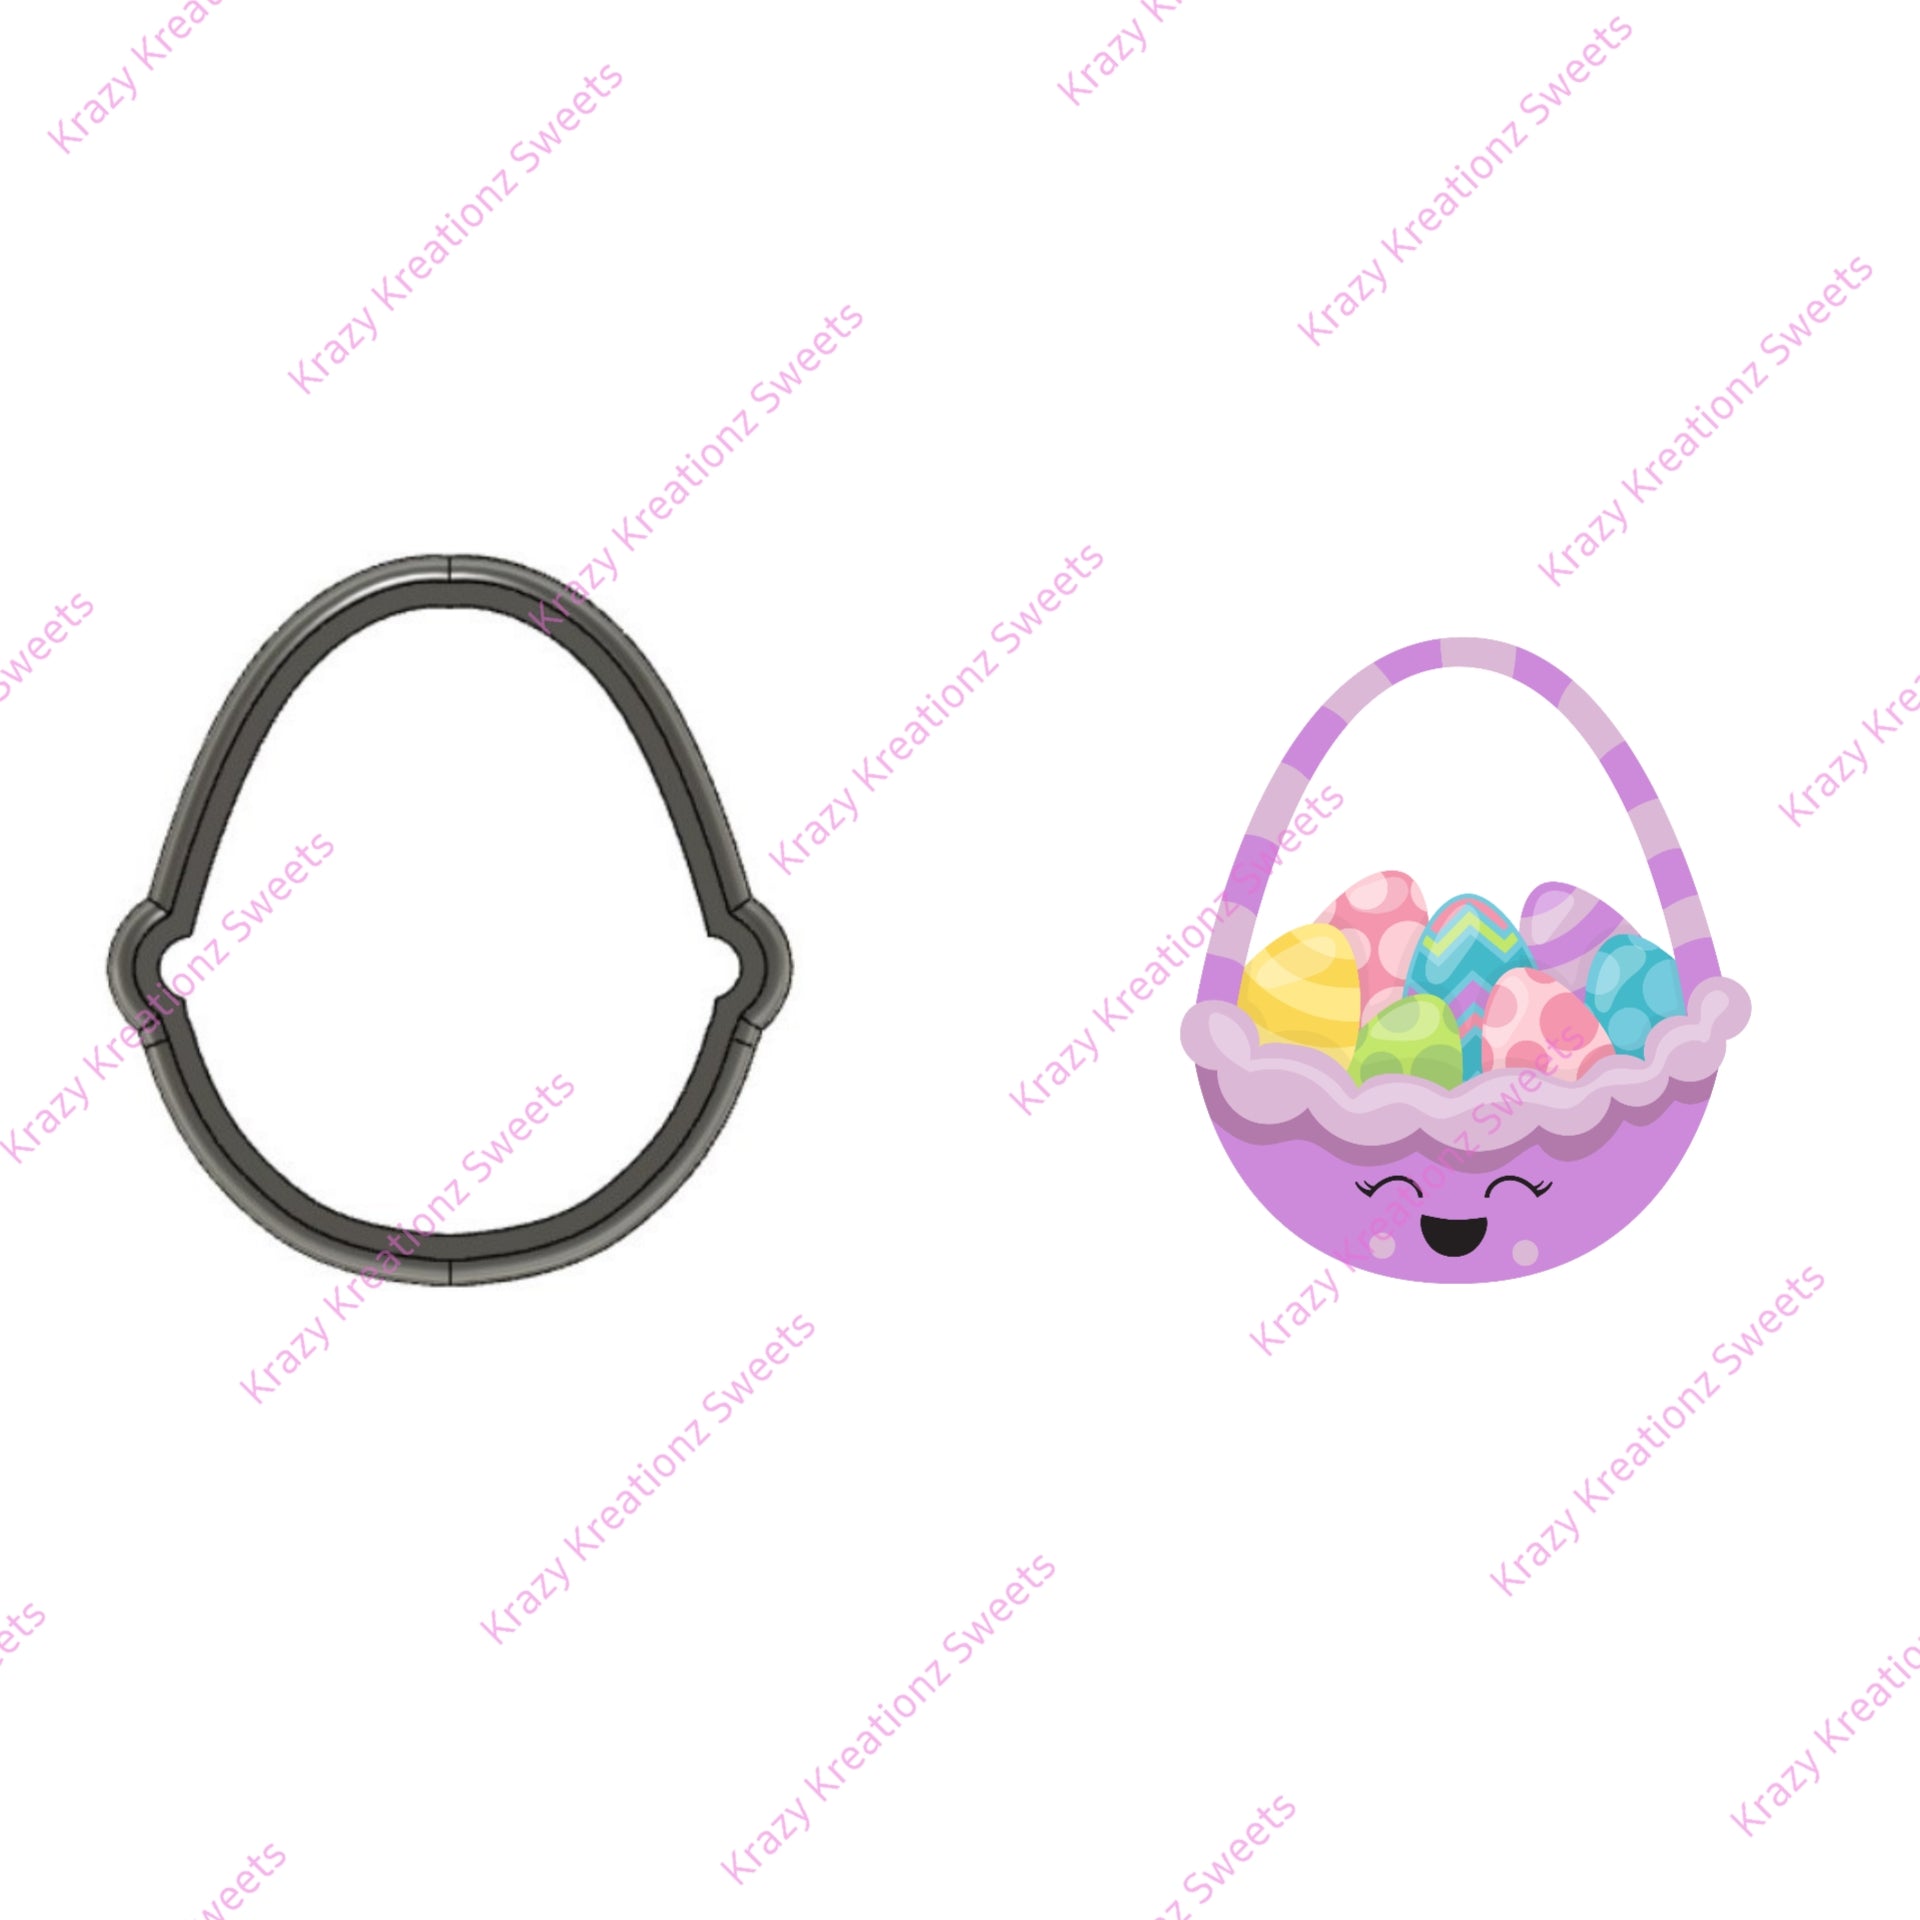 Smiley Easter Basket Cookie Cutter